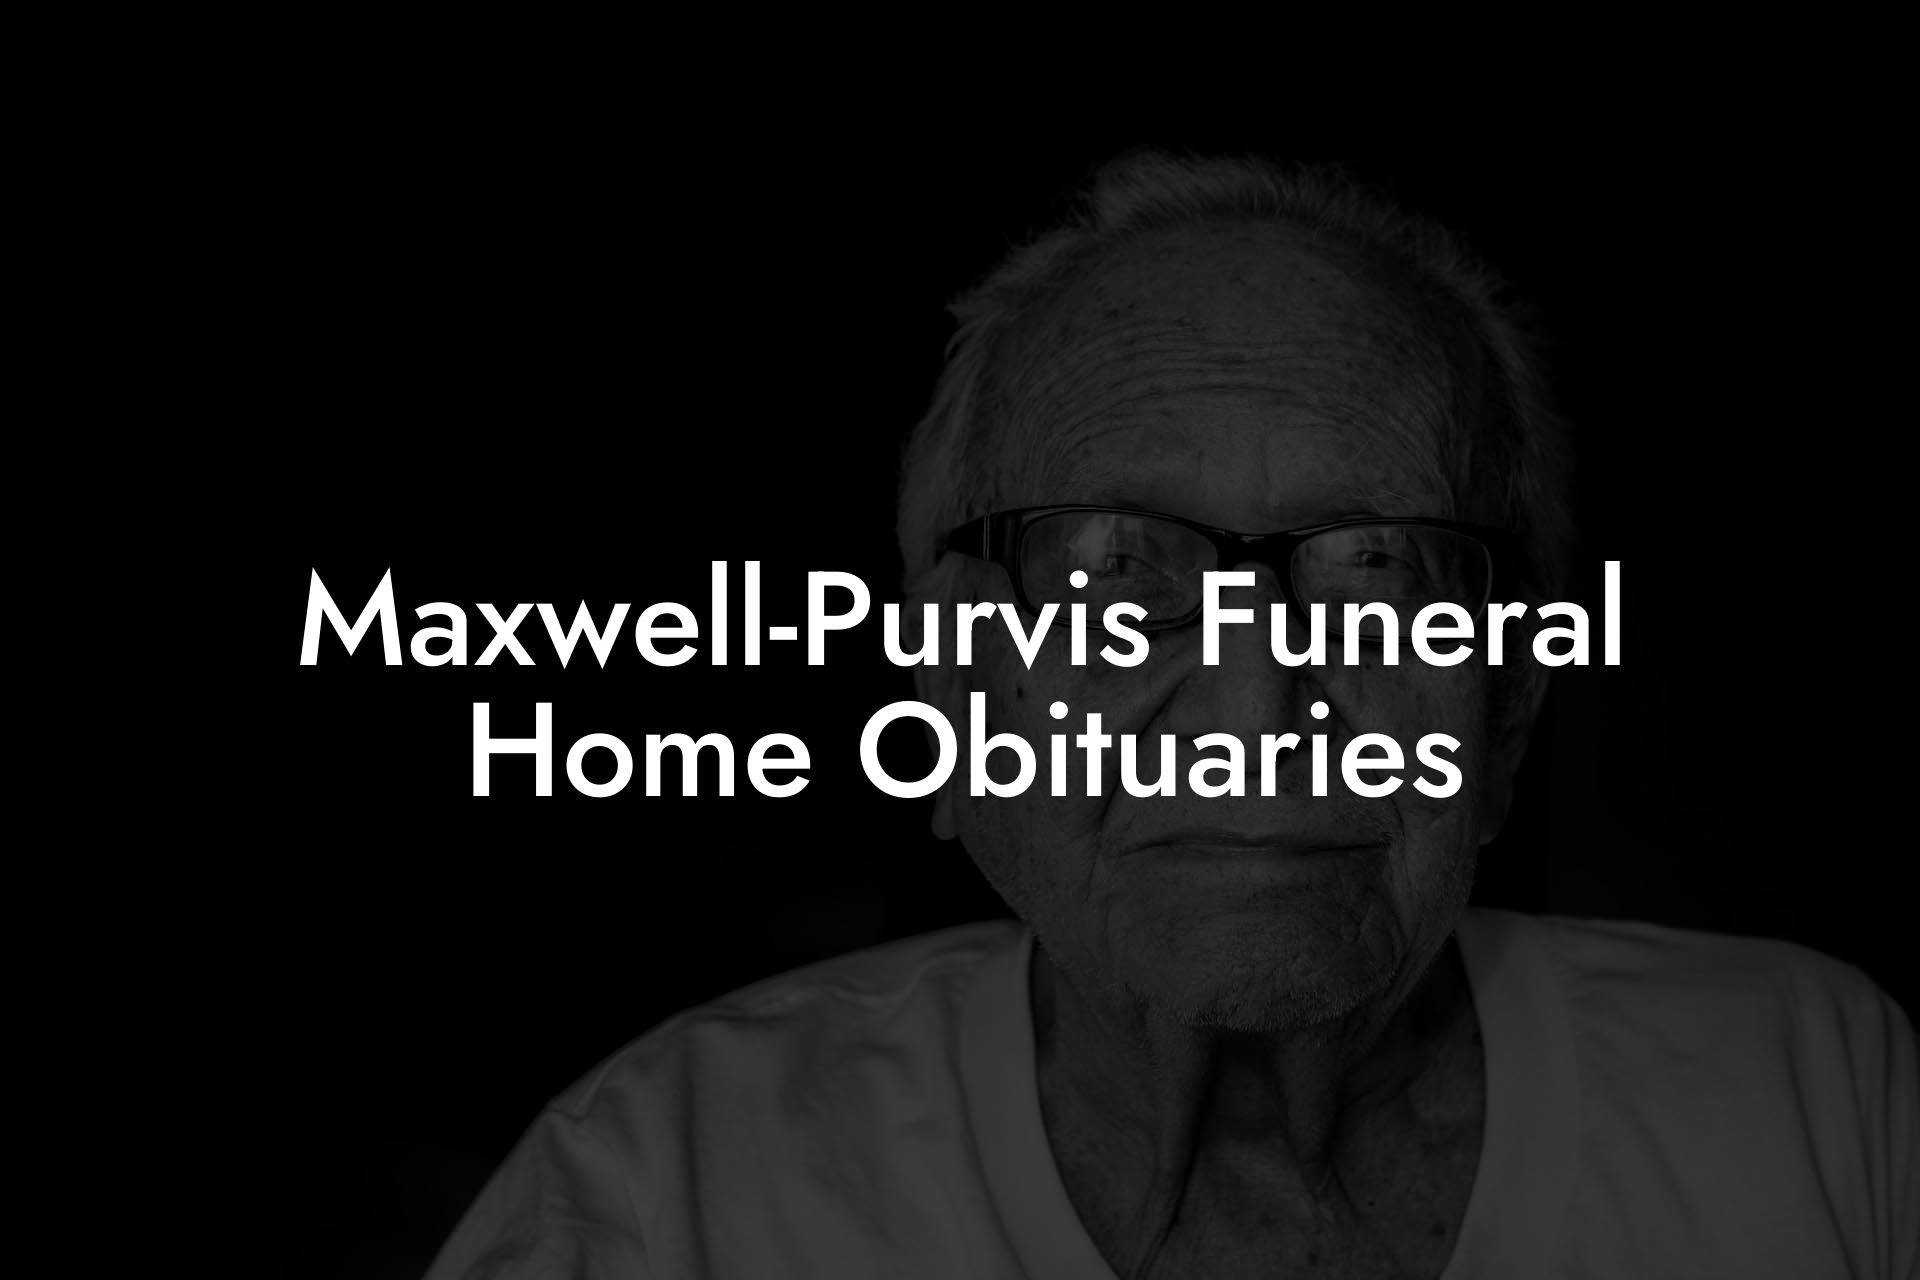 Maxwell-Purvis Funeral Home Obituaries